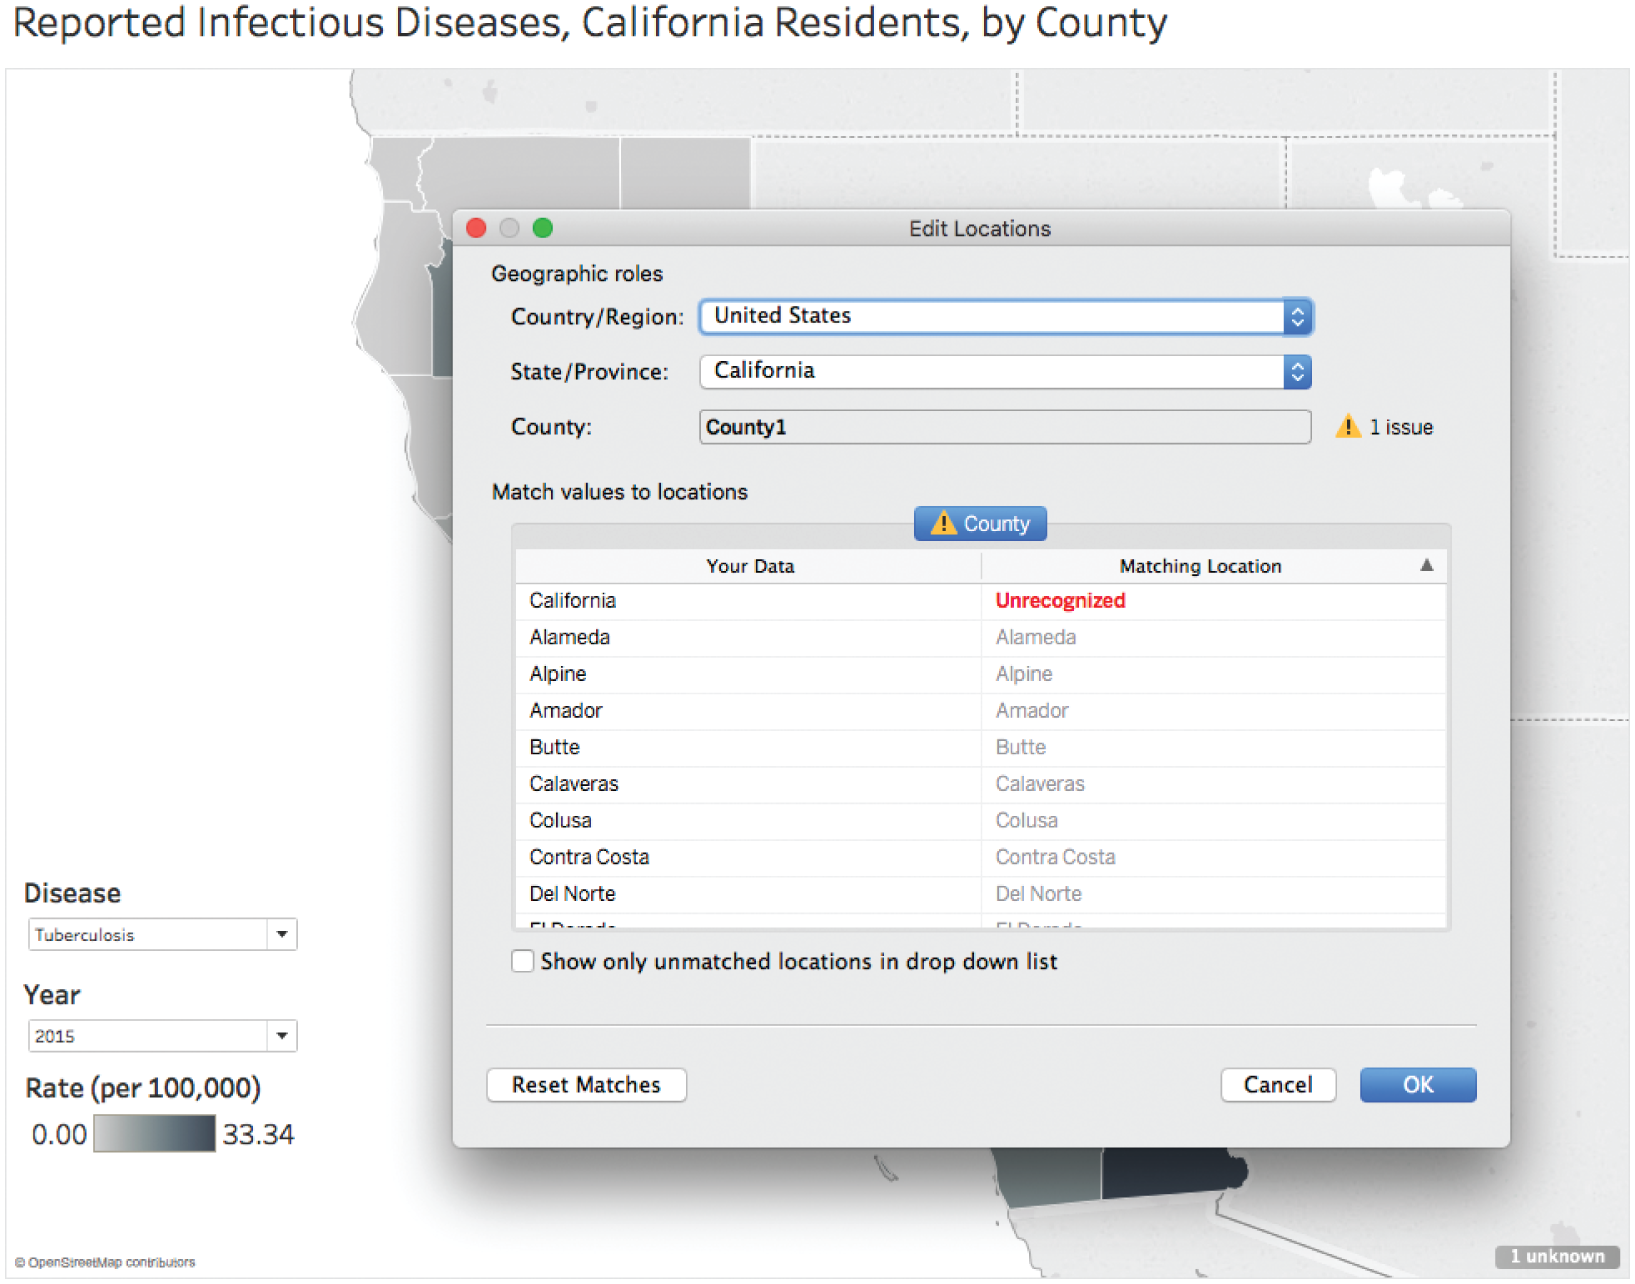 Choropleth map reporting tuberculosis infections in California residents, with a pop-up of geographic roles, with a row for each disease and year combination for each county.